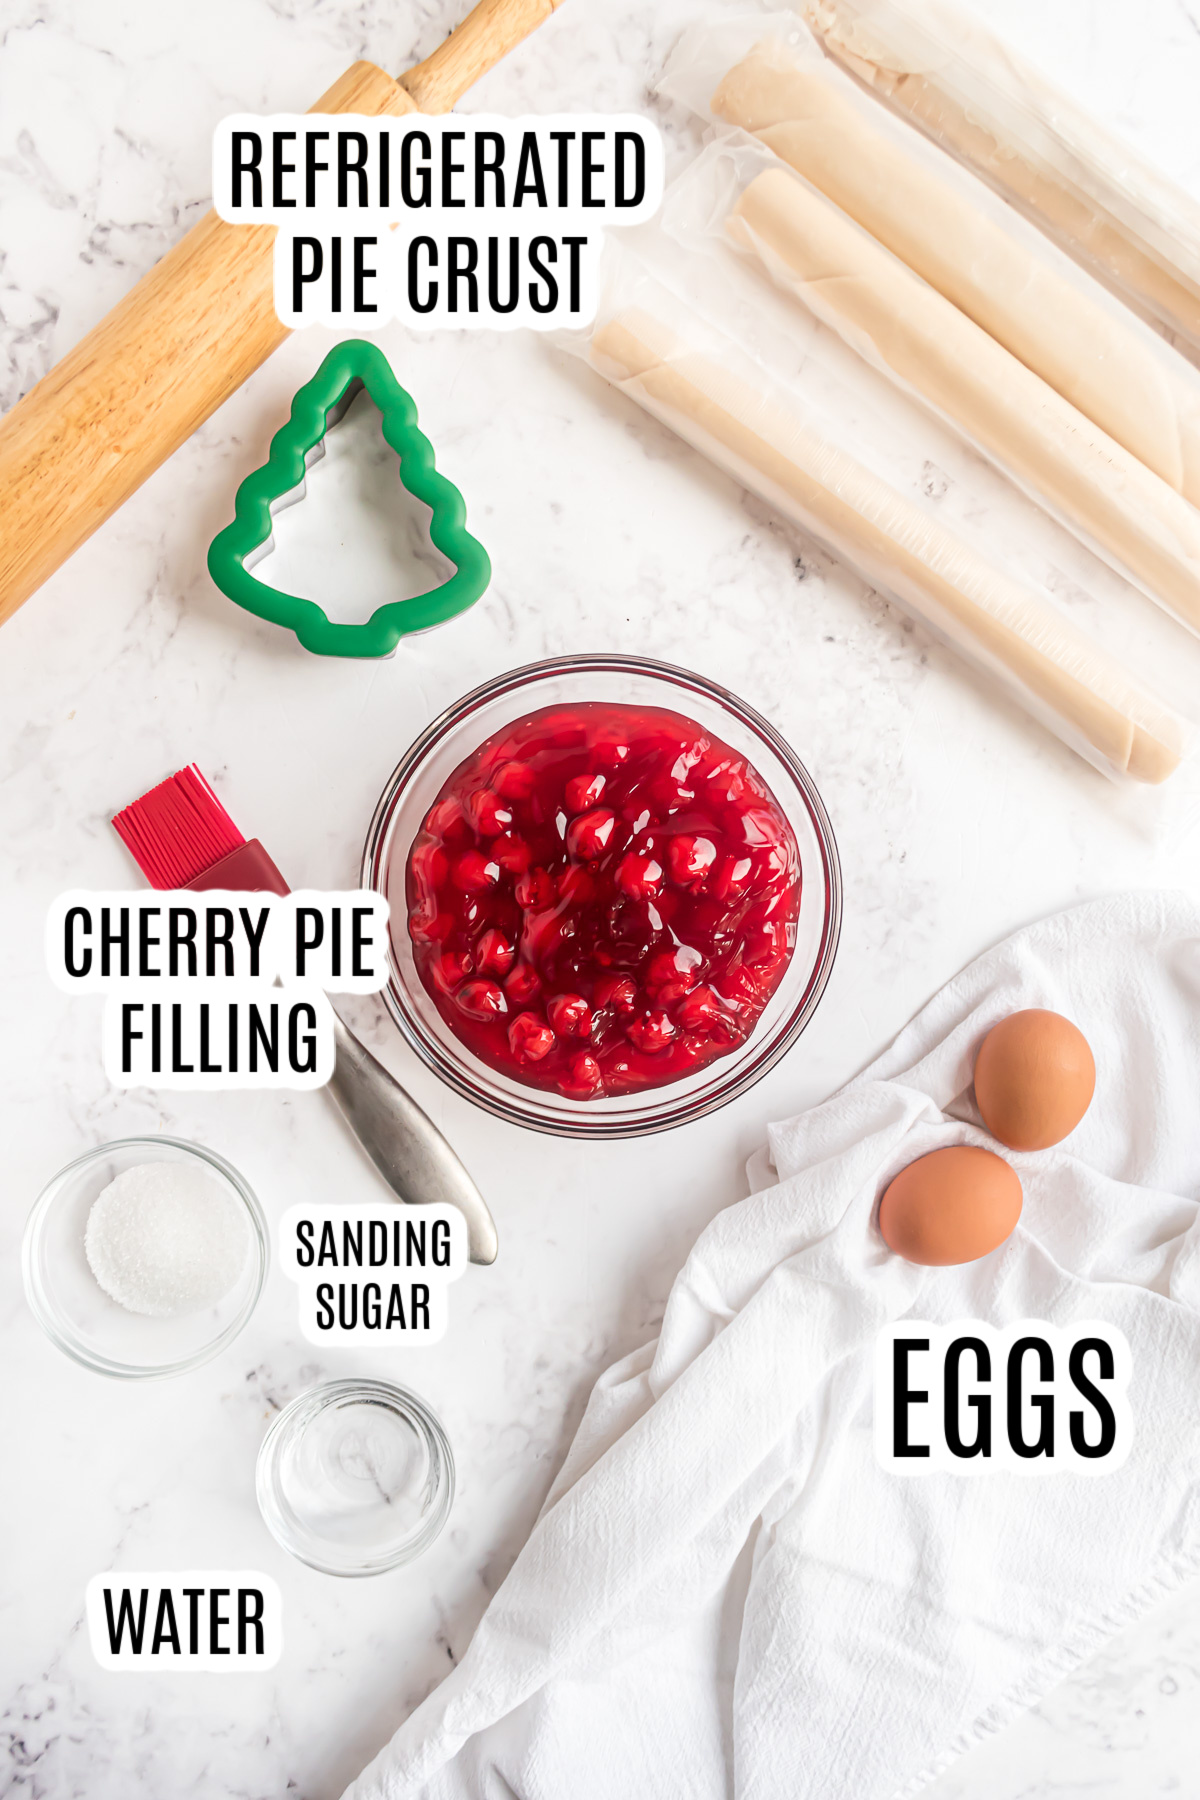 All of the ingredients need to make the cherry hand pies including refrigerated pie crust, canned cherry pie filling, eggs, sanding sugar and water.